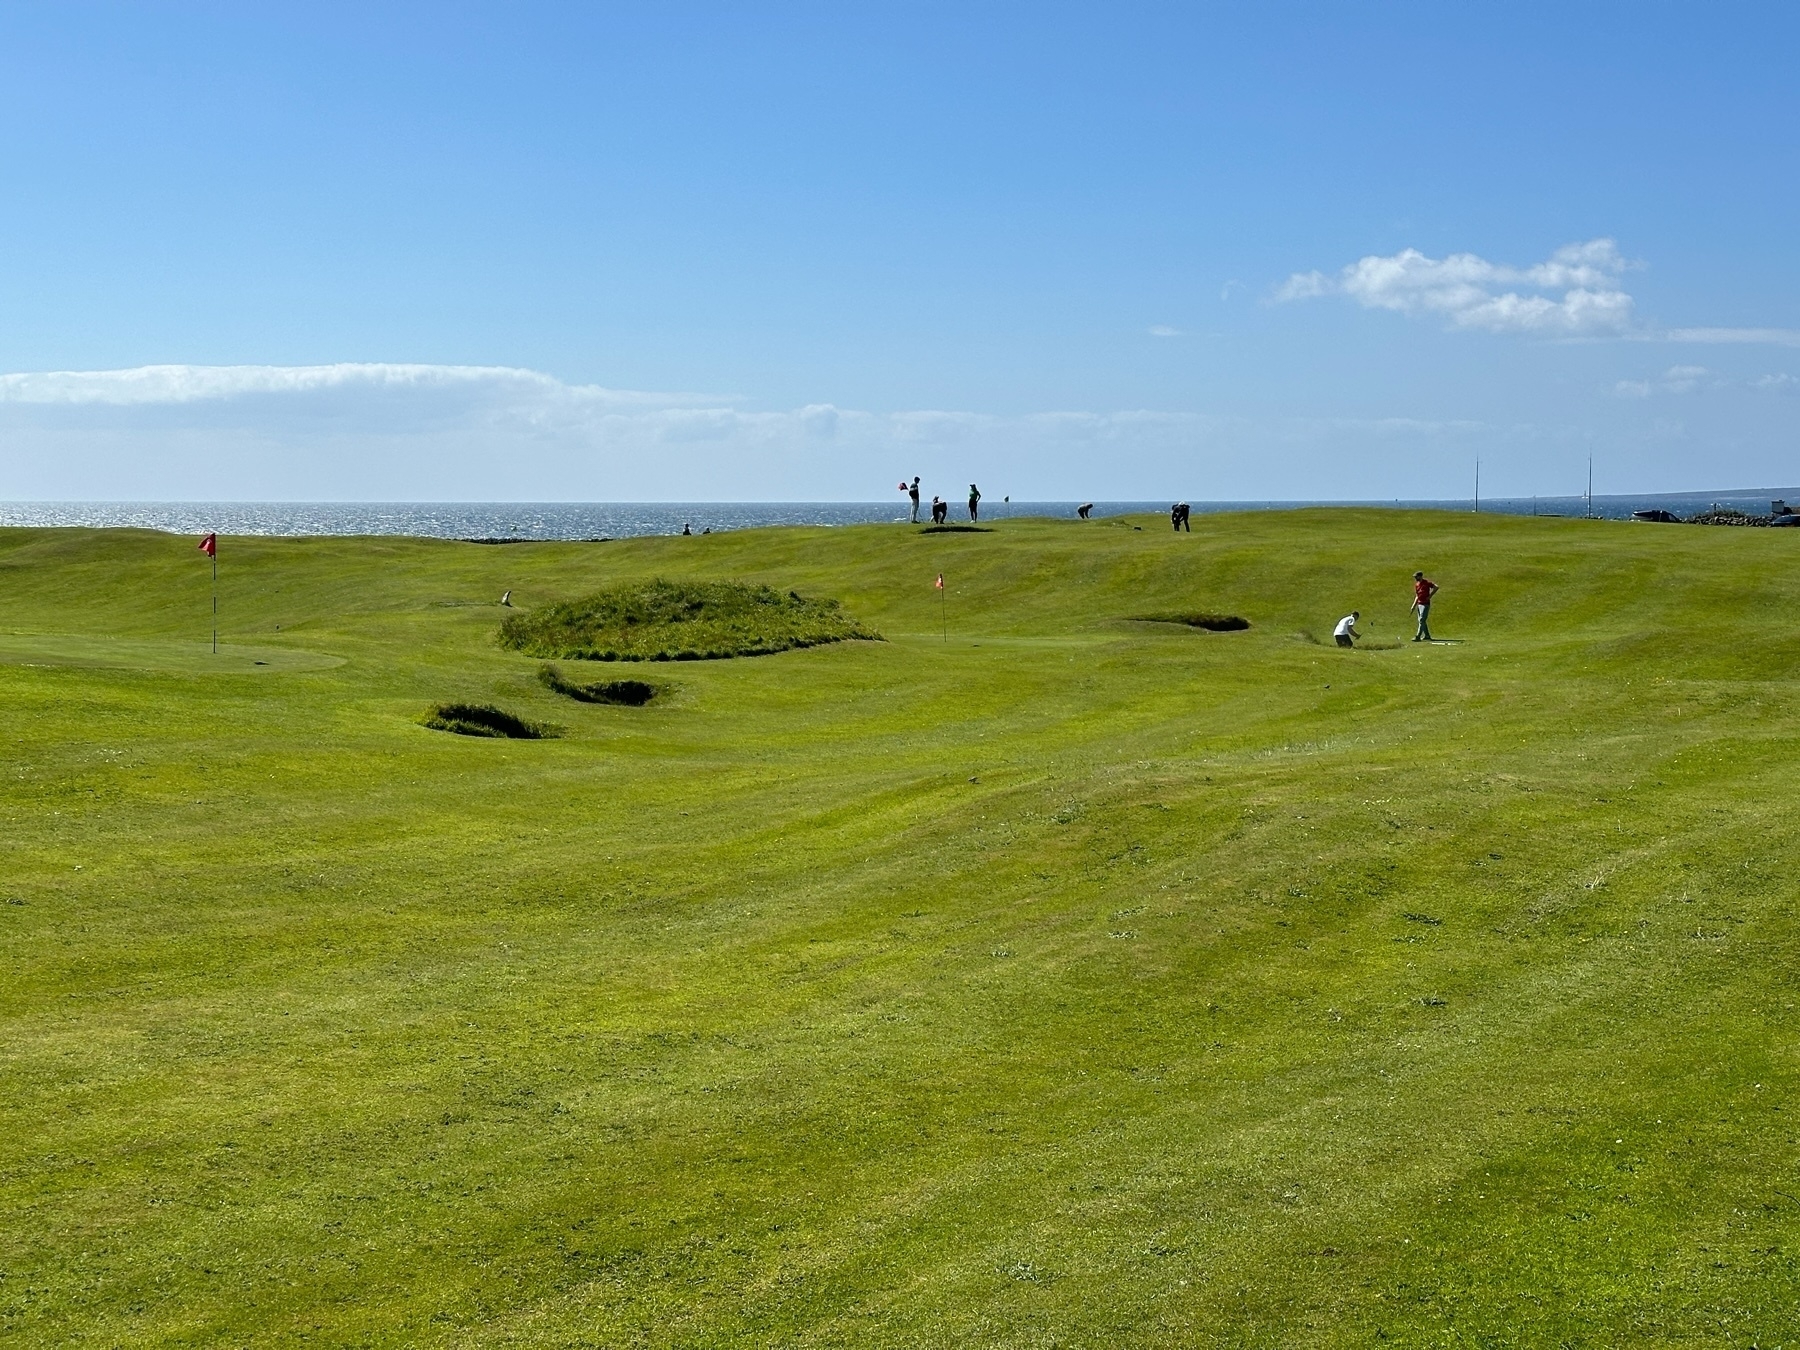 Auto-generated description: A grassy golf course near the ocean, with a few people in the distance under a clear blue sky.